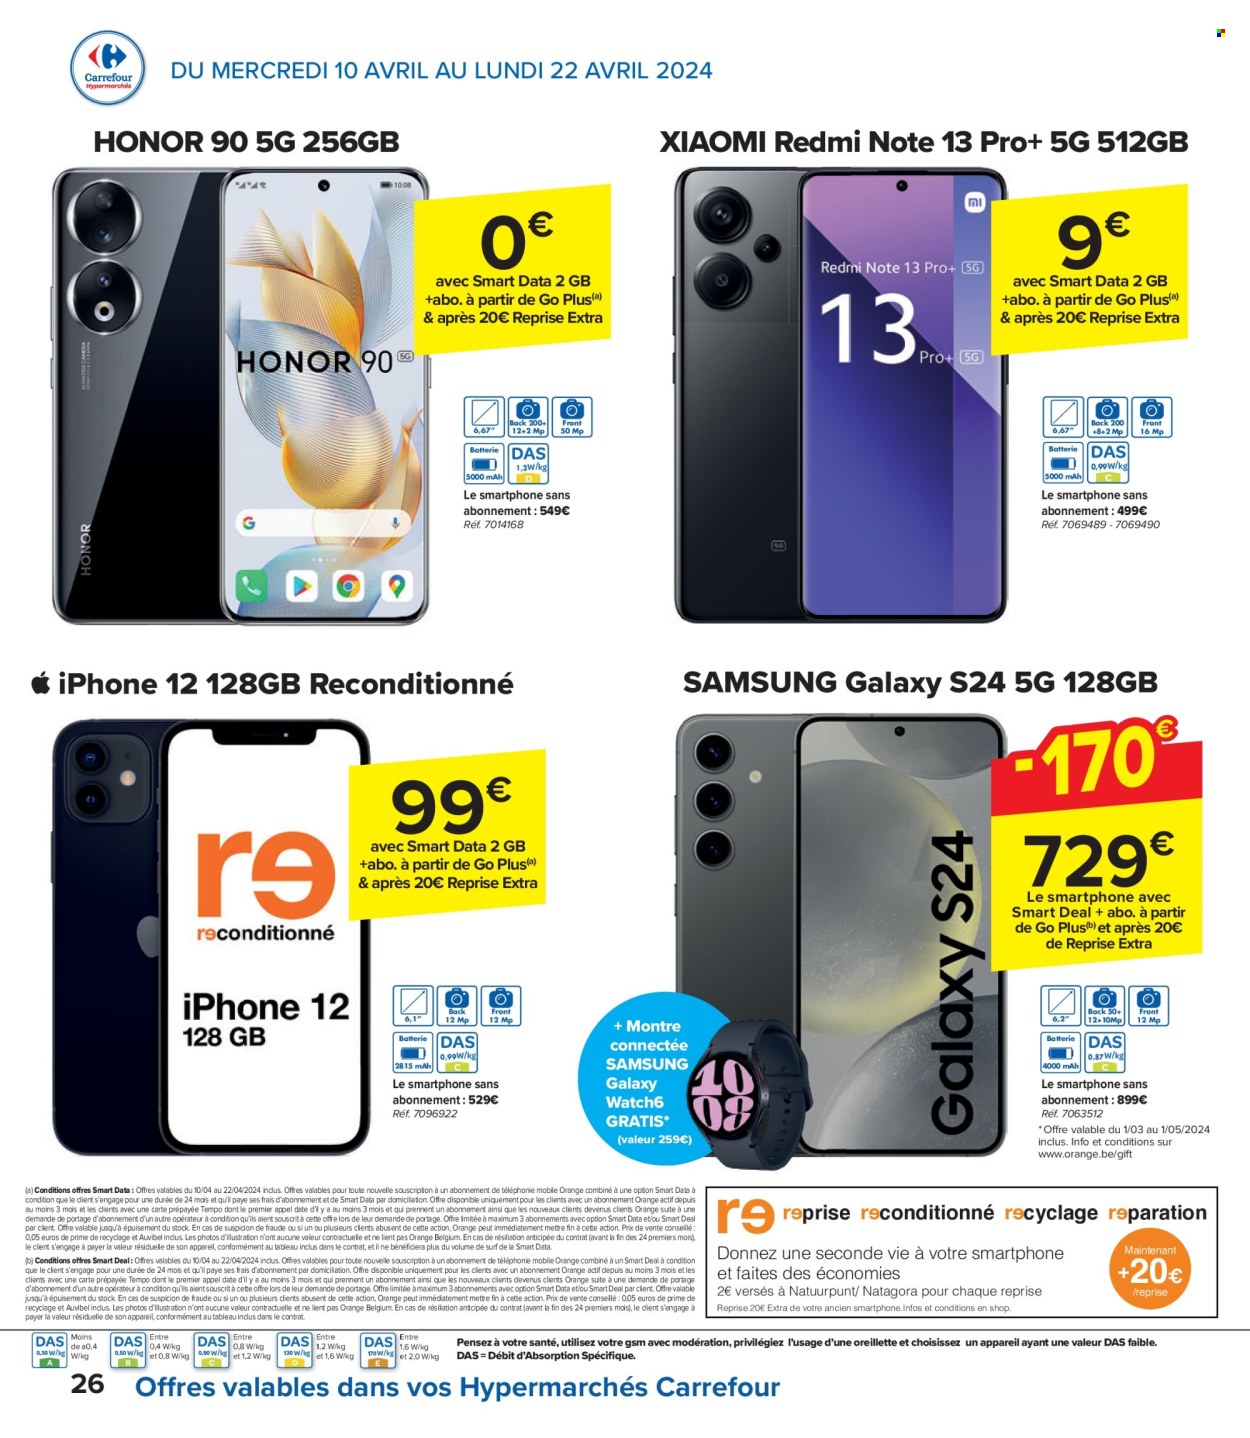 Catalogue Carrefour hypermarkt - 10.4.2024 - 22.4.2024. Page 26.